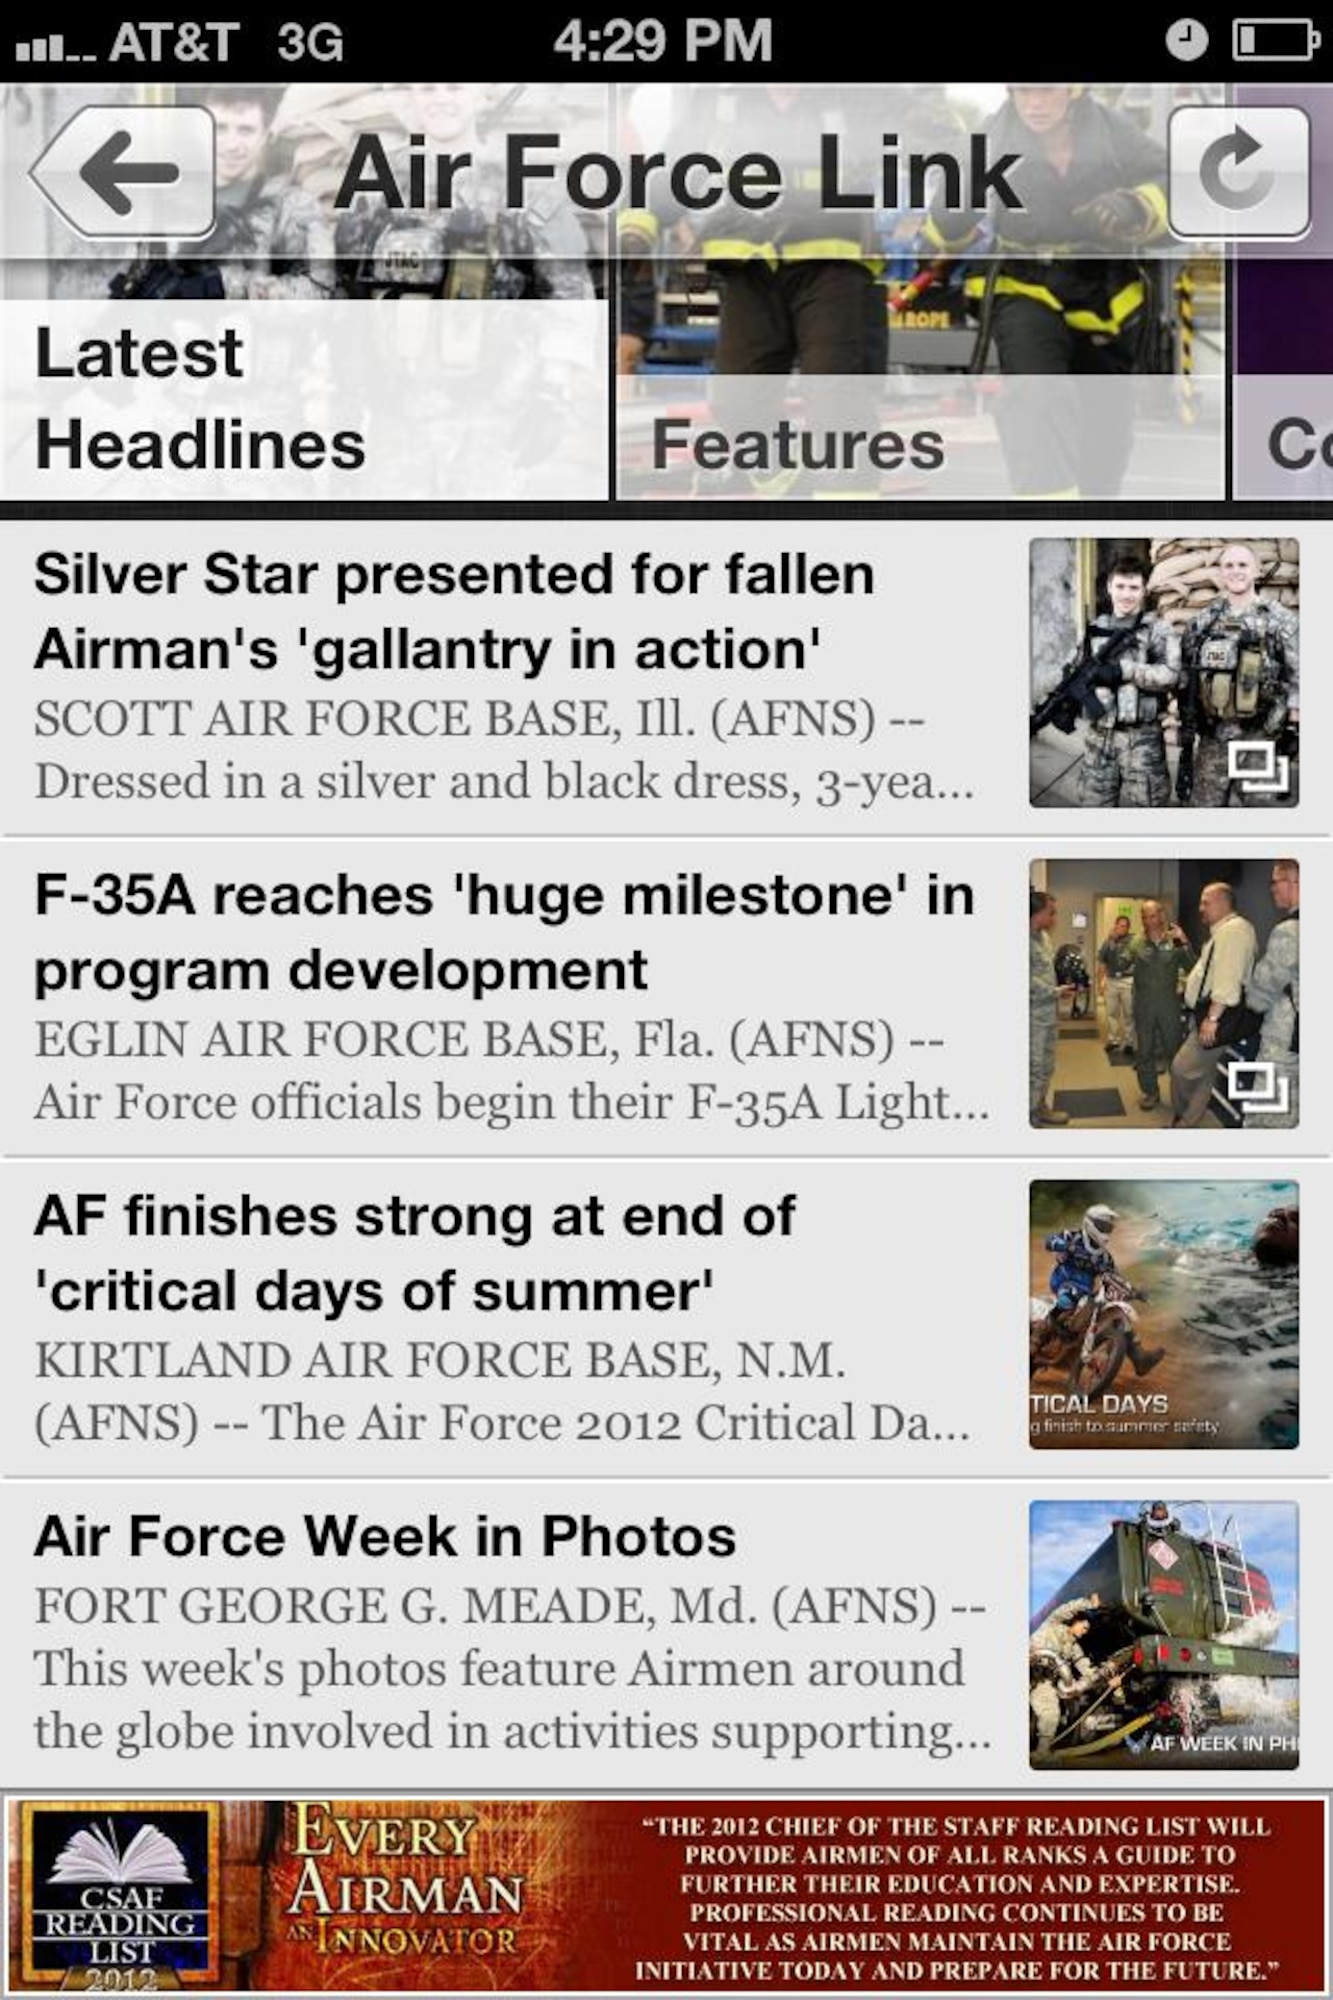 AFLINK mobile application users will also have access to Air Force news. (U.S. Air Force graphic)